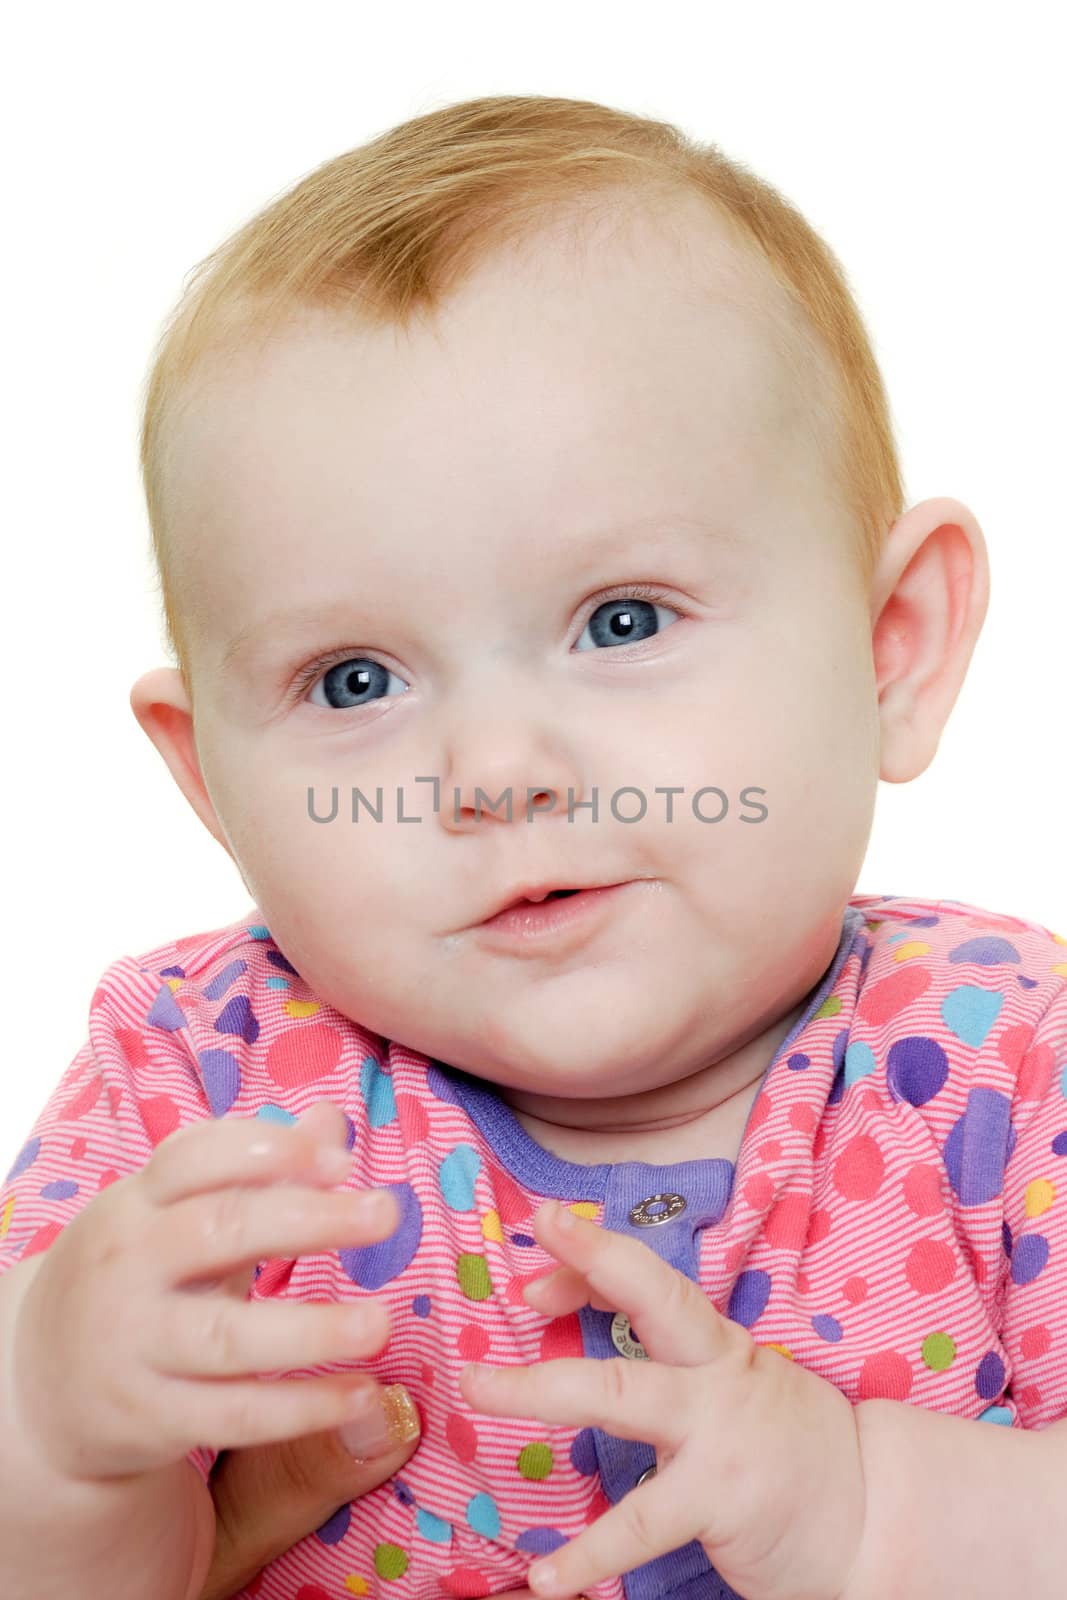 A sweet happy baby 3 month young.Taken on a white background.